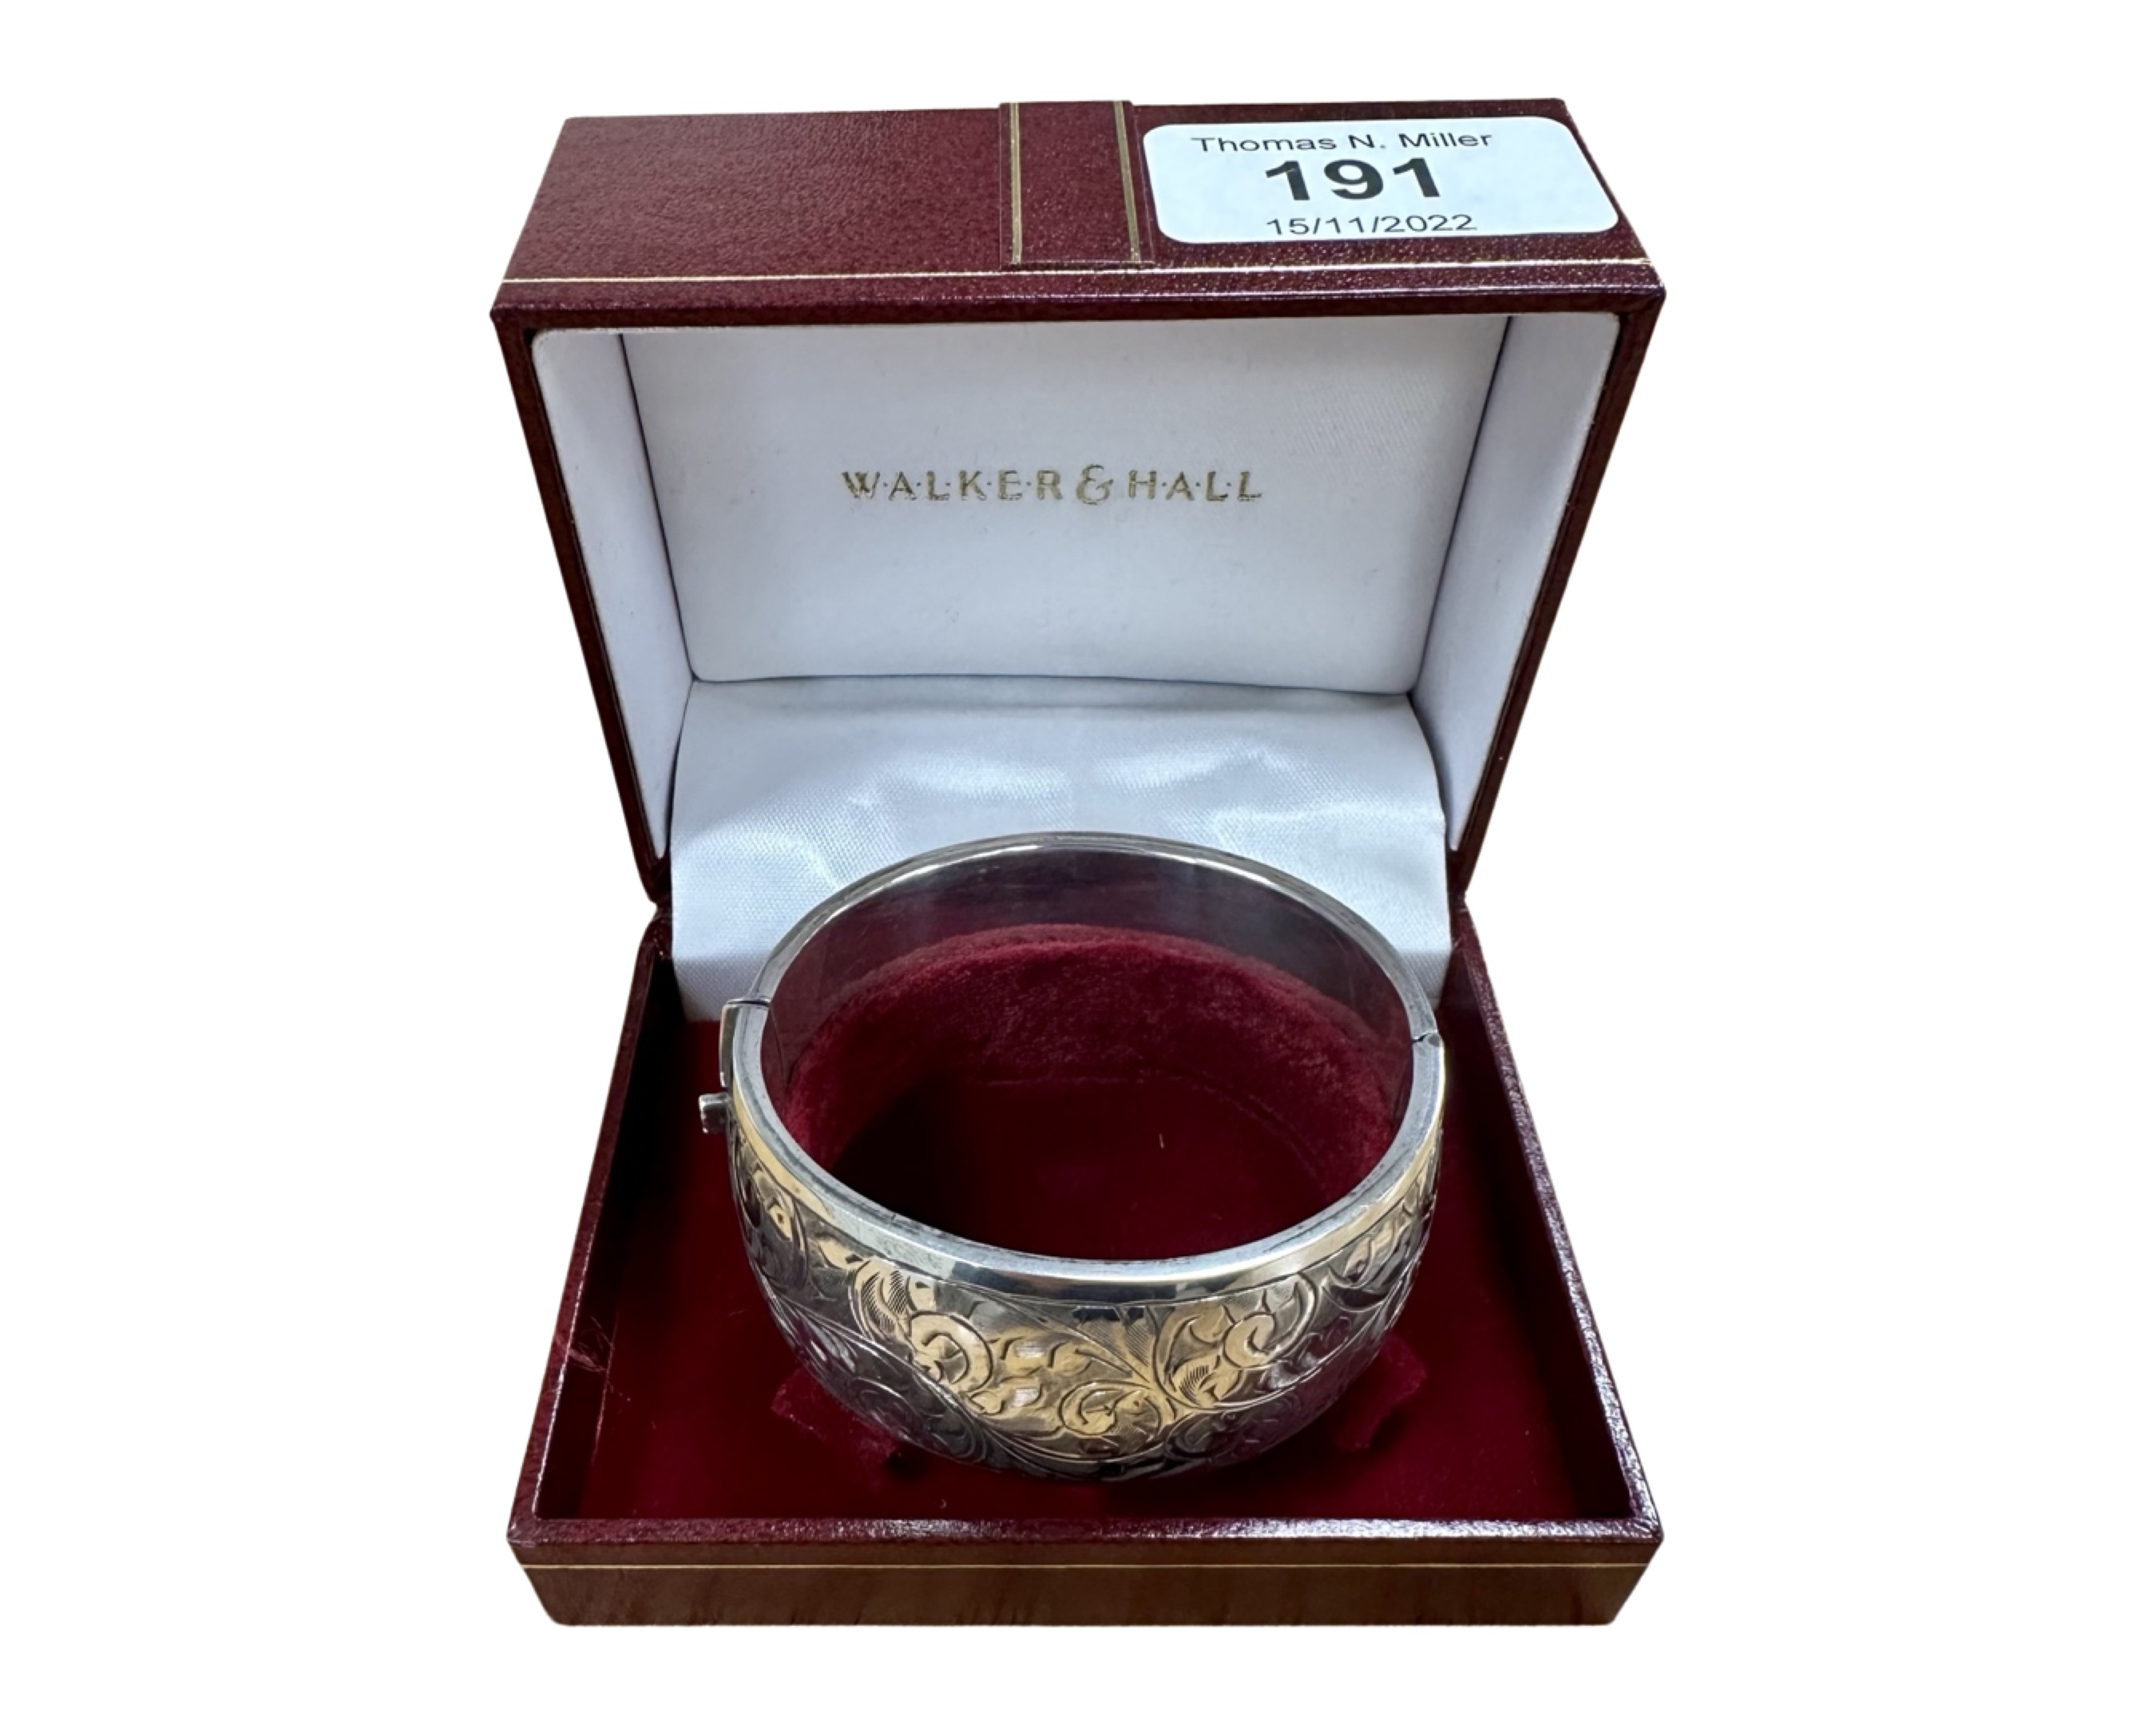 An engraved silver bangle in Walker & Hall box.